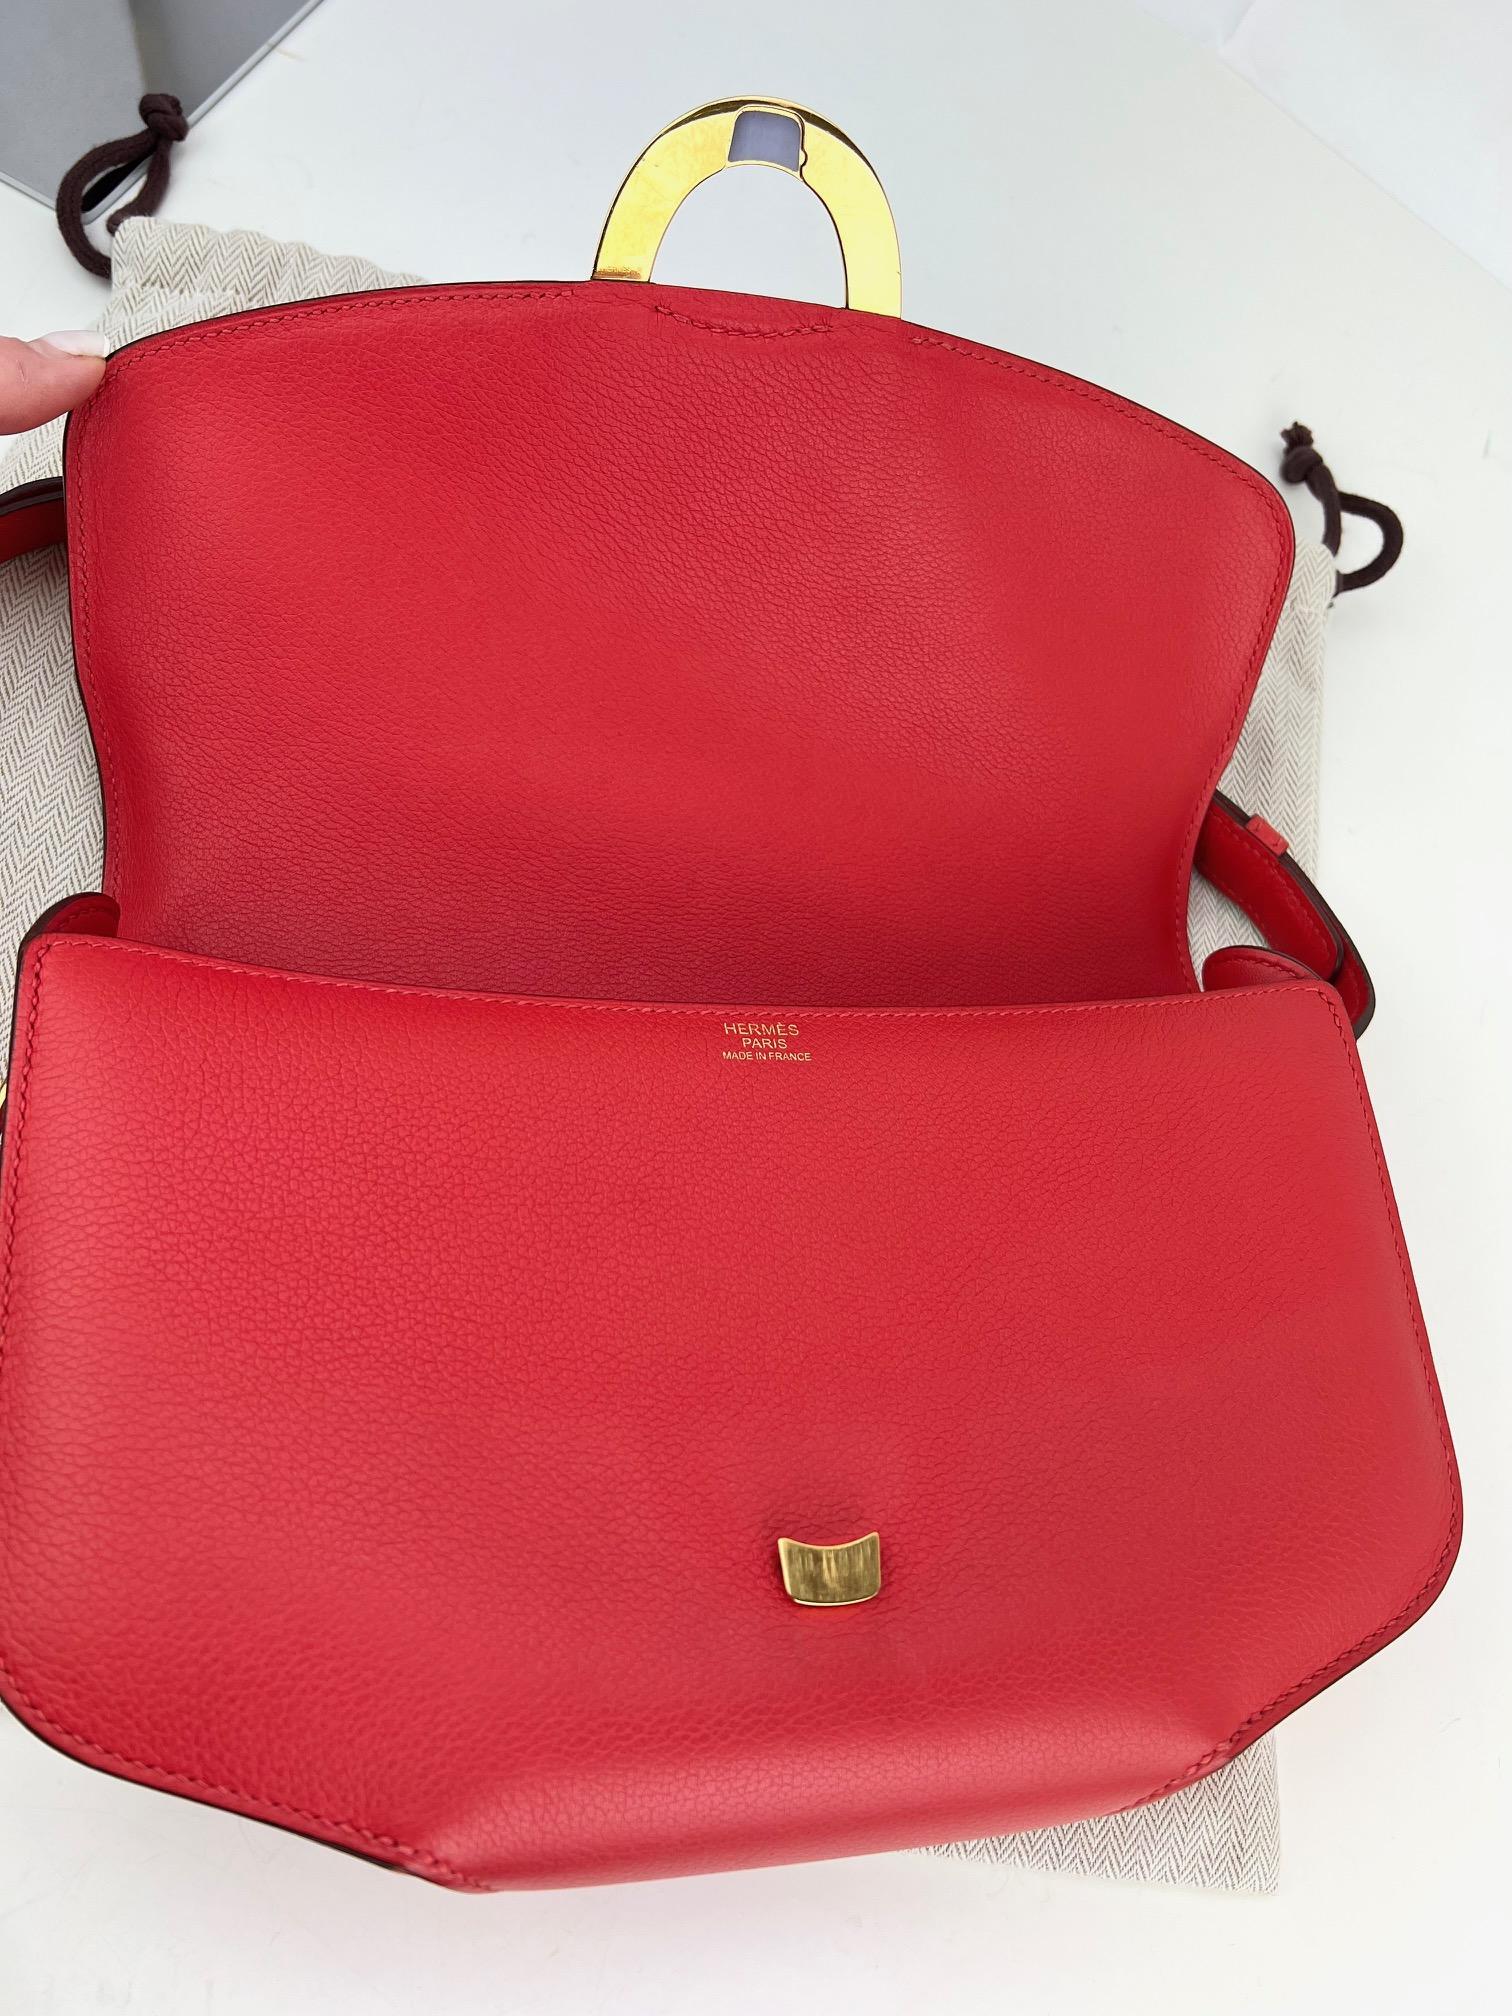 Hermes Evercolor Cherche Midi 25 Rouge Tomato Bag In Excellent Condition In Freehold, NJ